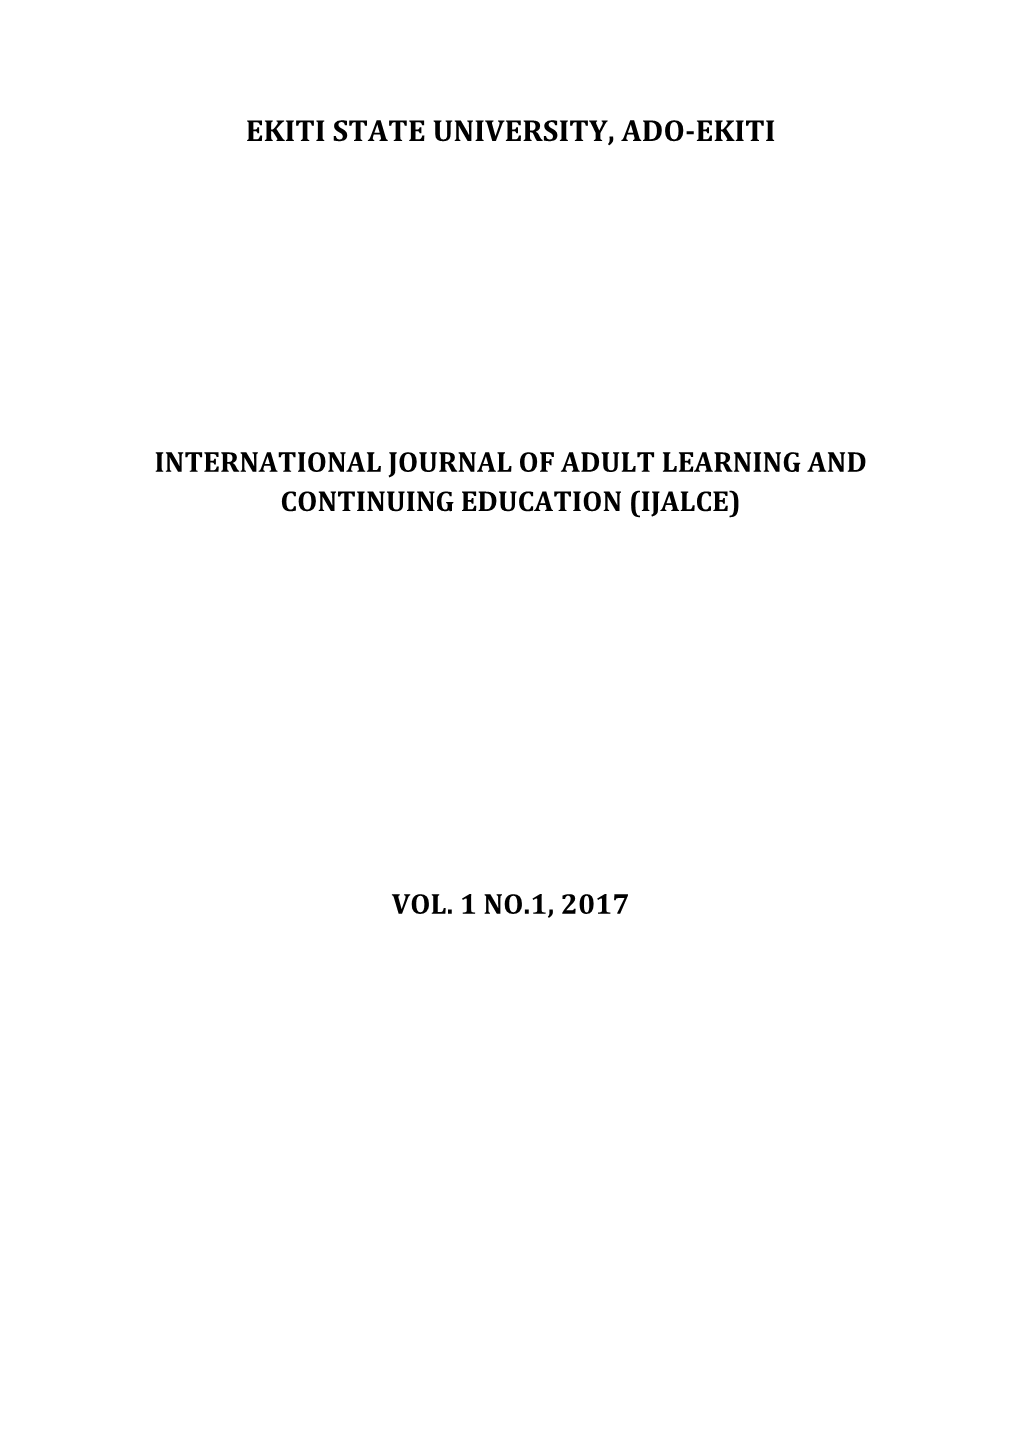 International Journal of Adult Learning and Continuing Education (Ijalce)